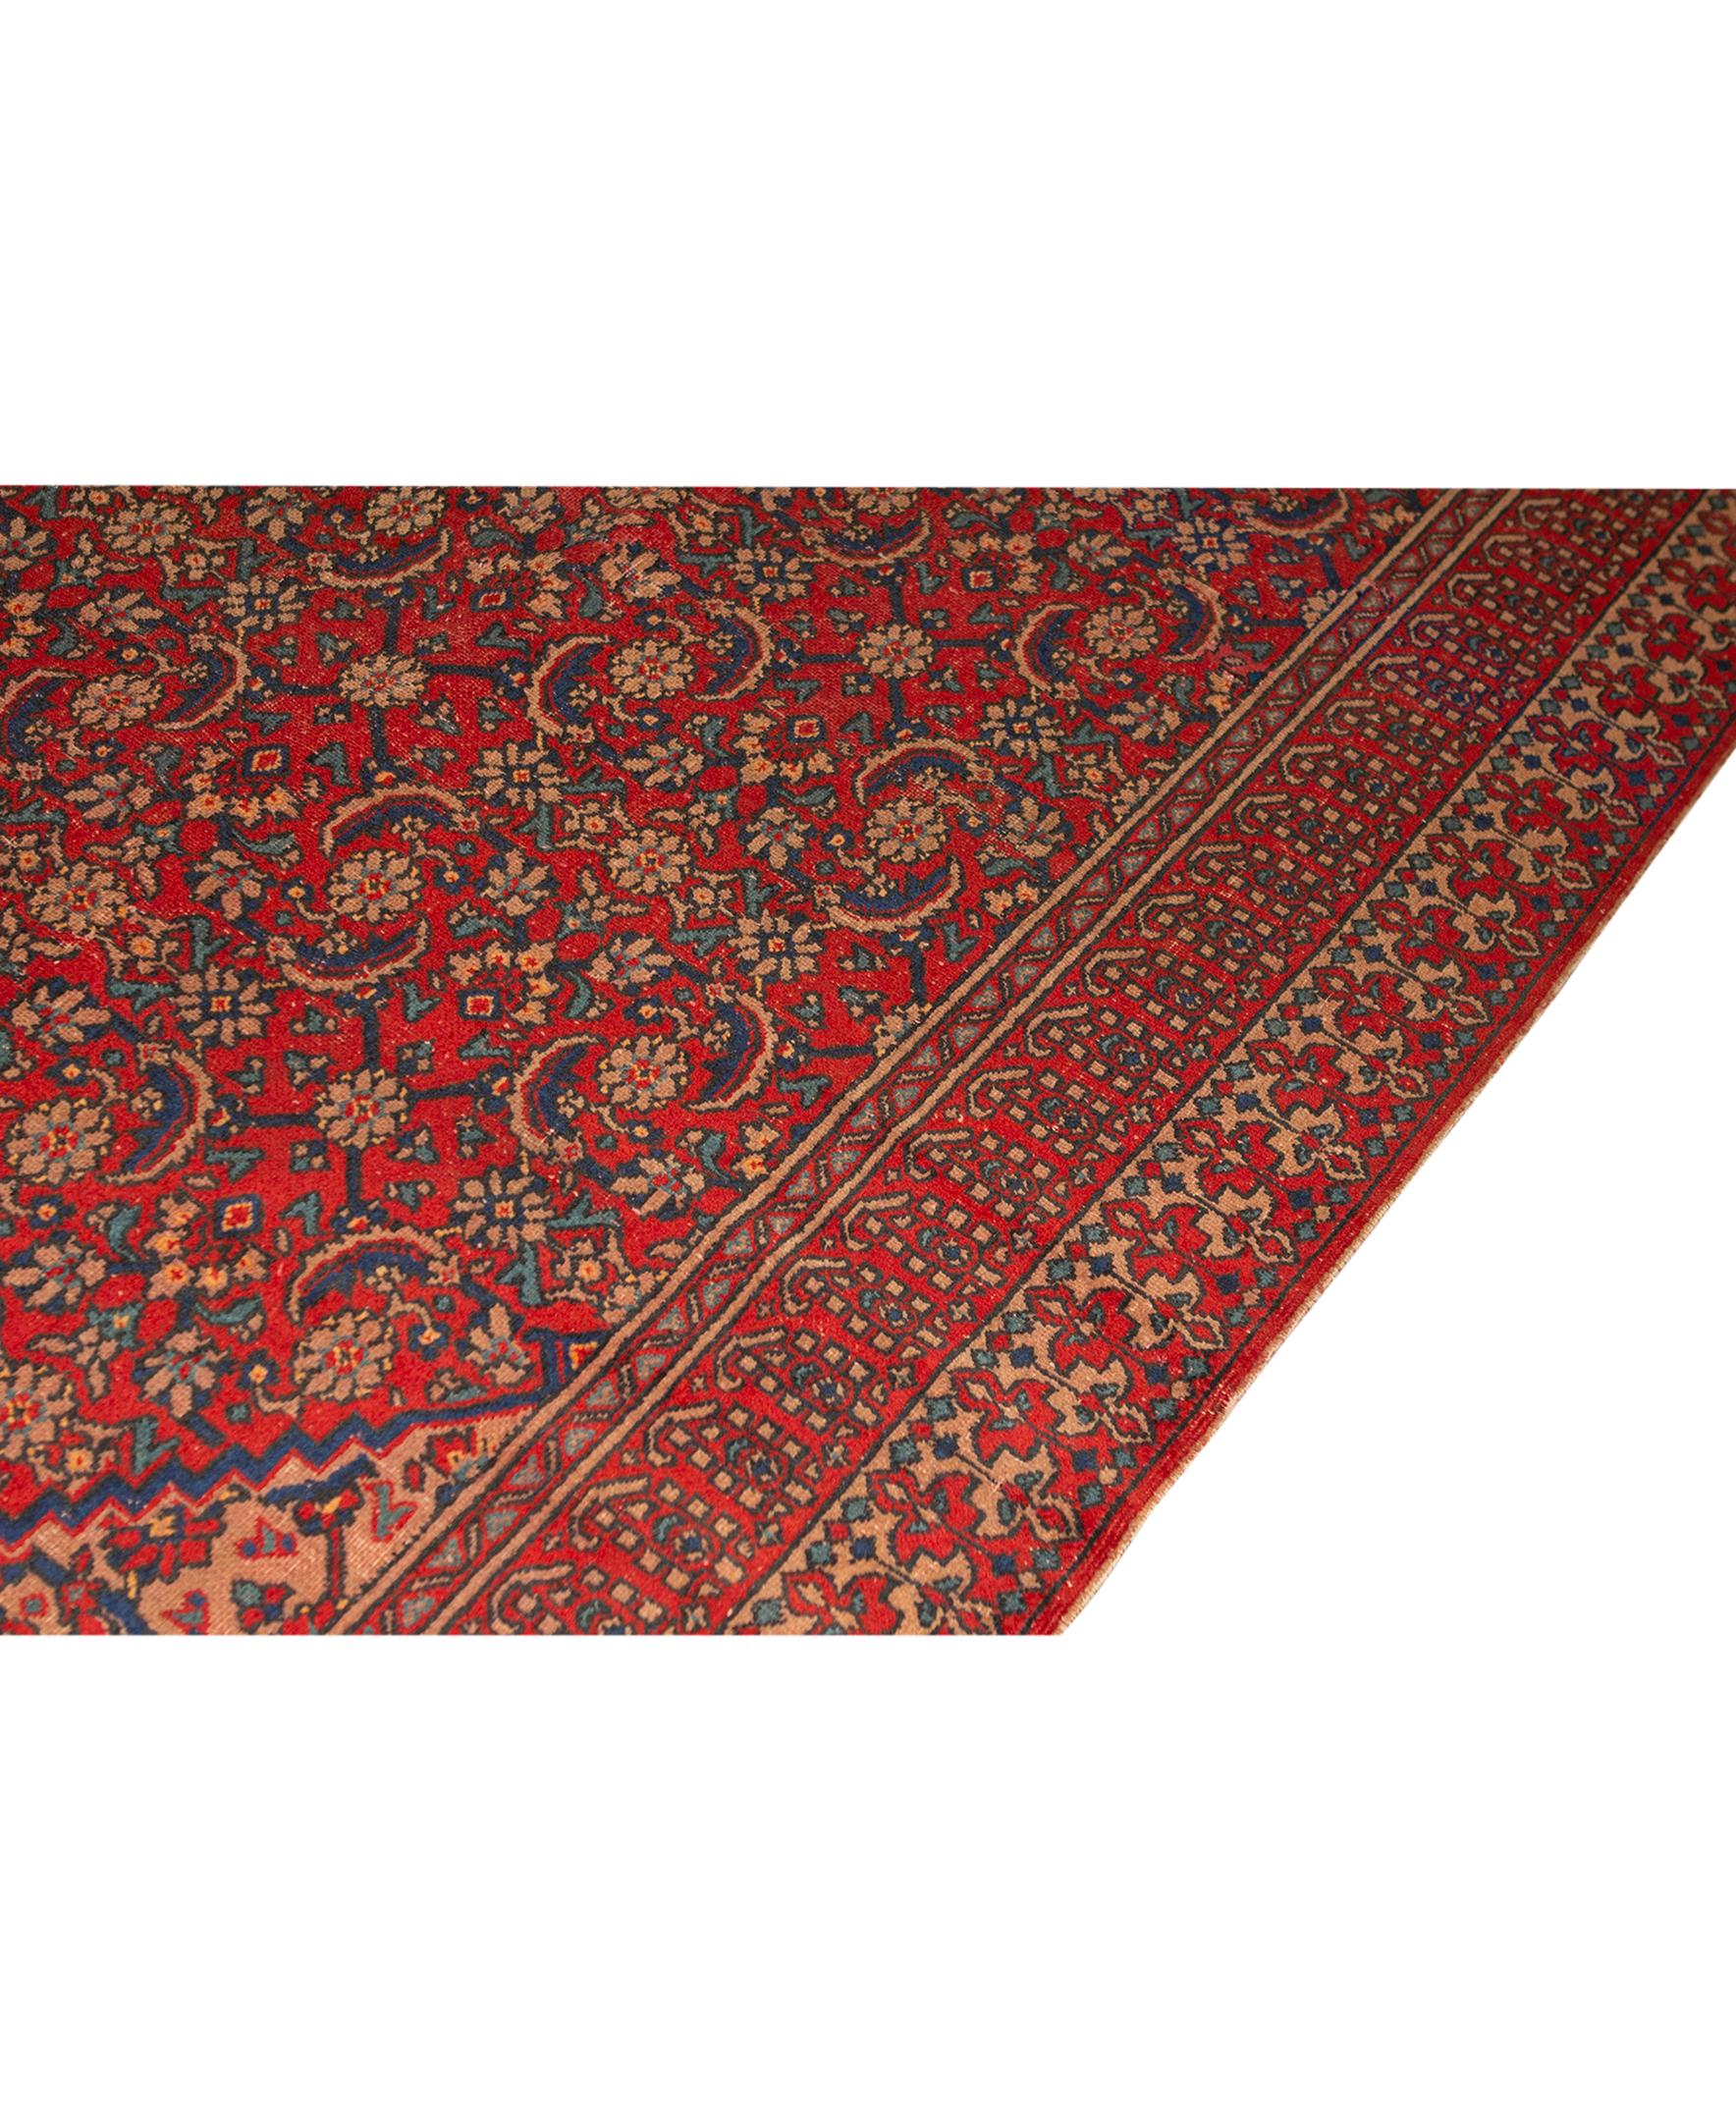 Hand-Woven   Antique Persian Fine Traditional Handwoven Luxury Wool Red Rug For Sale